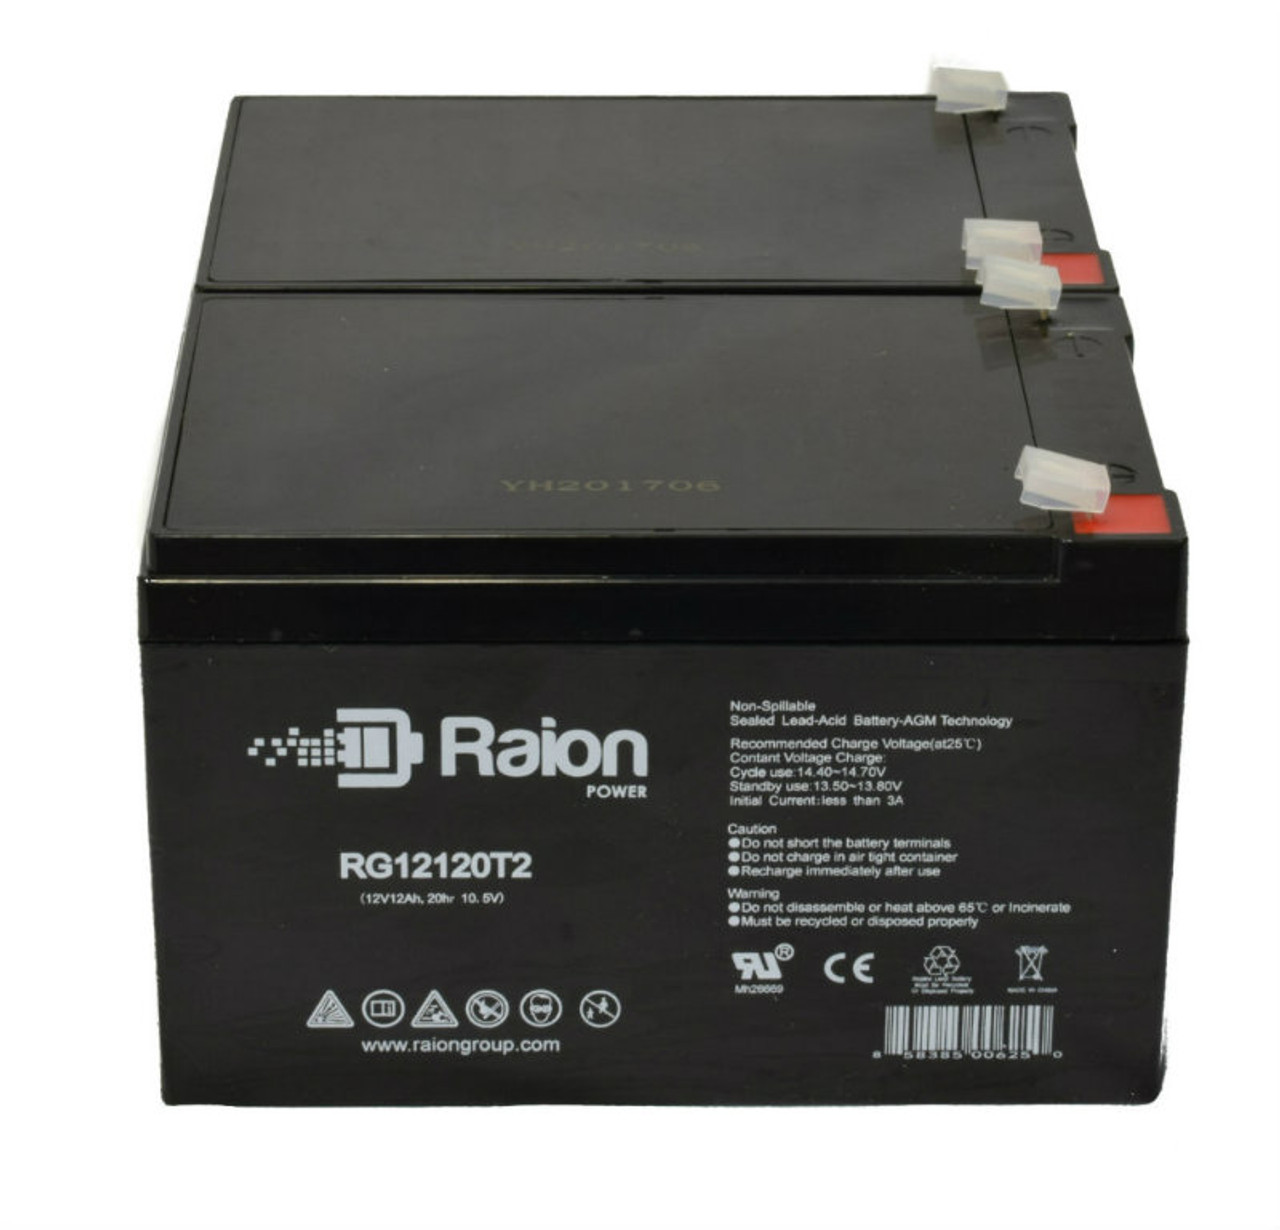 Raion Power 12V 12Ah Non-Spillable Compatible Replacement Battery for Sigmas SP12-12 - (2 Pack)